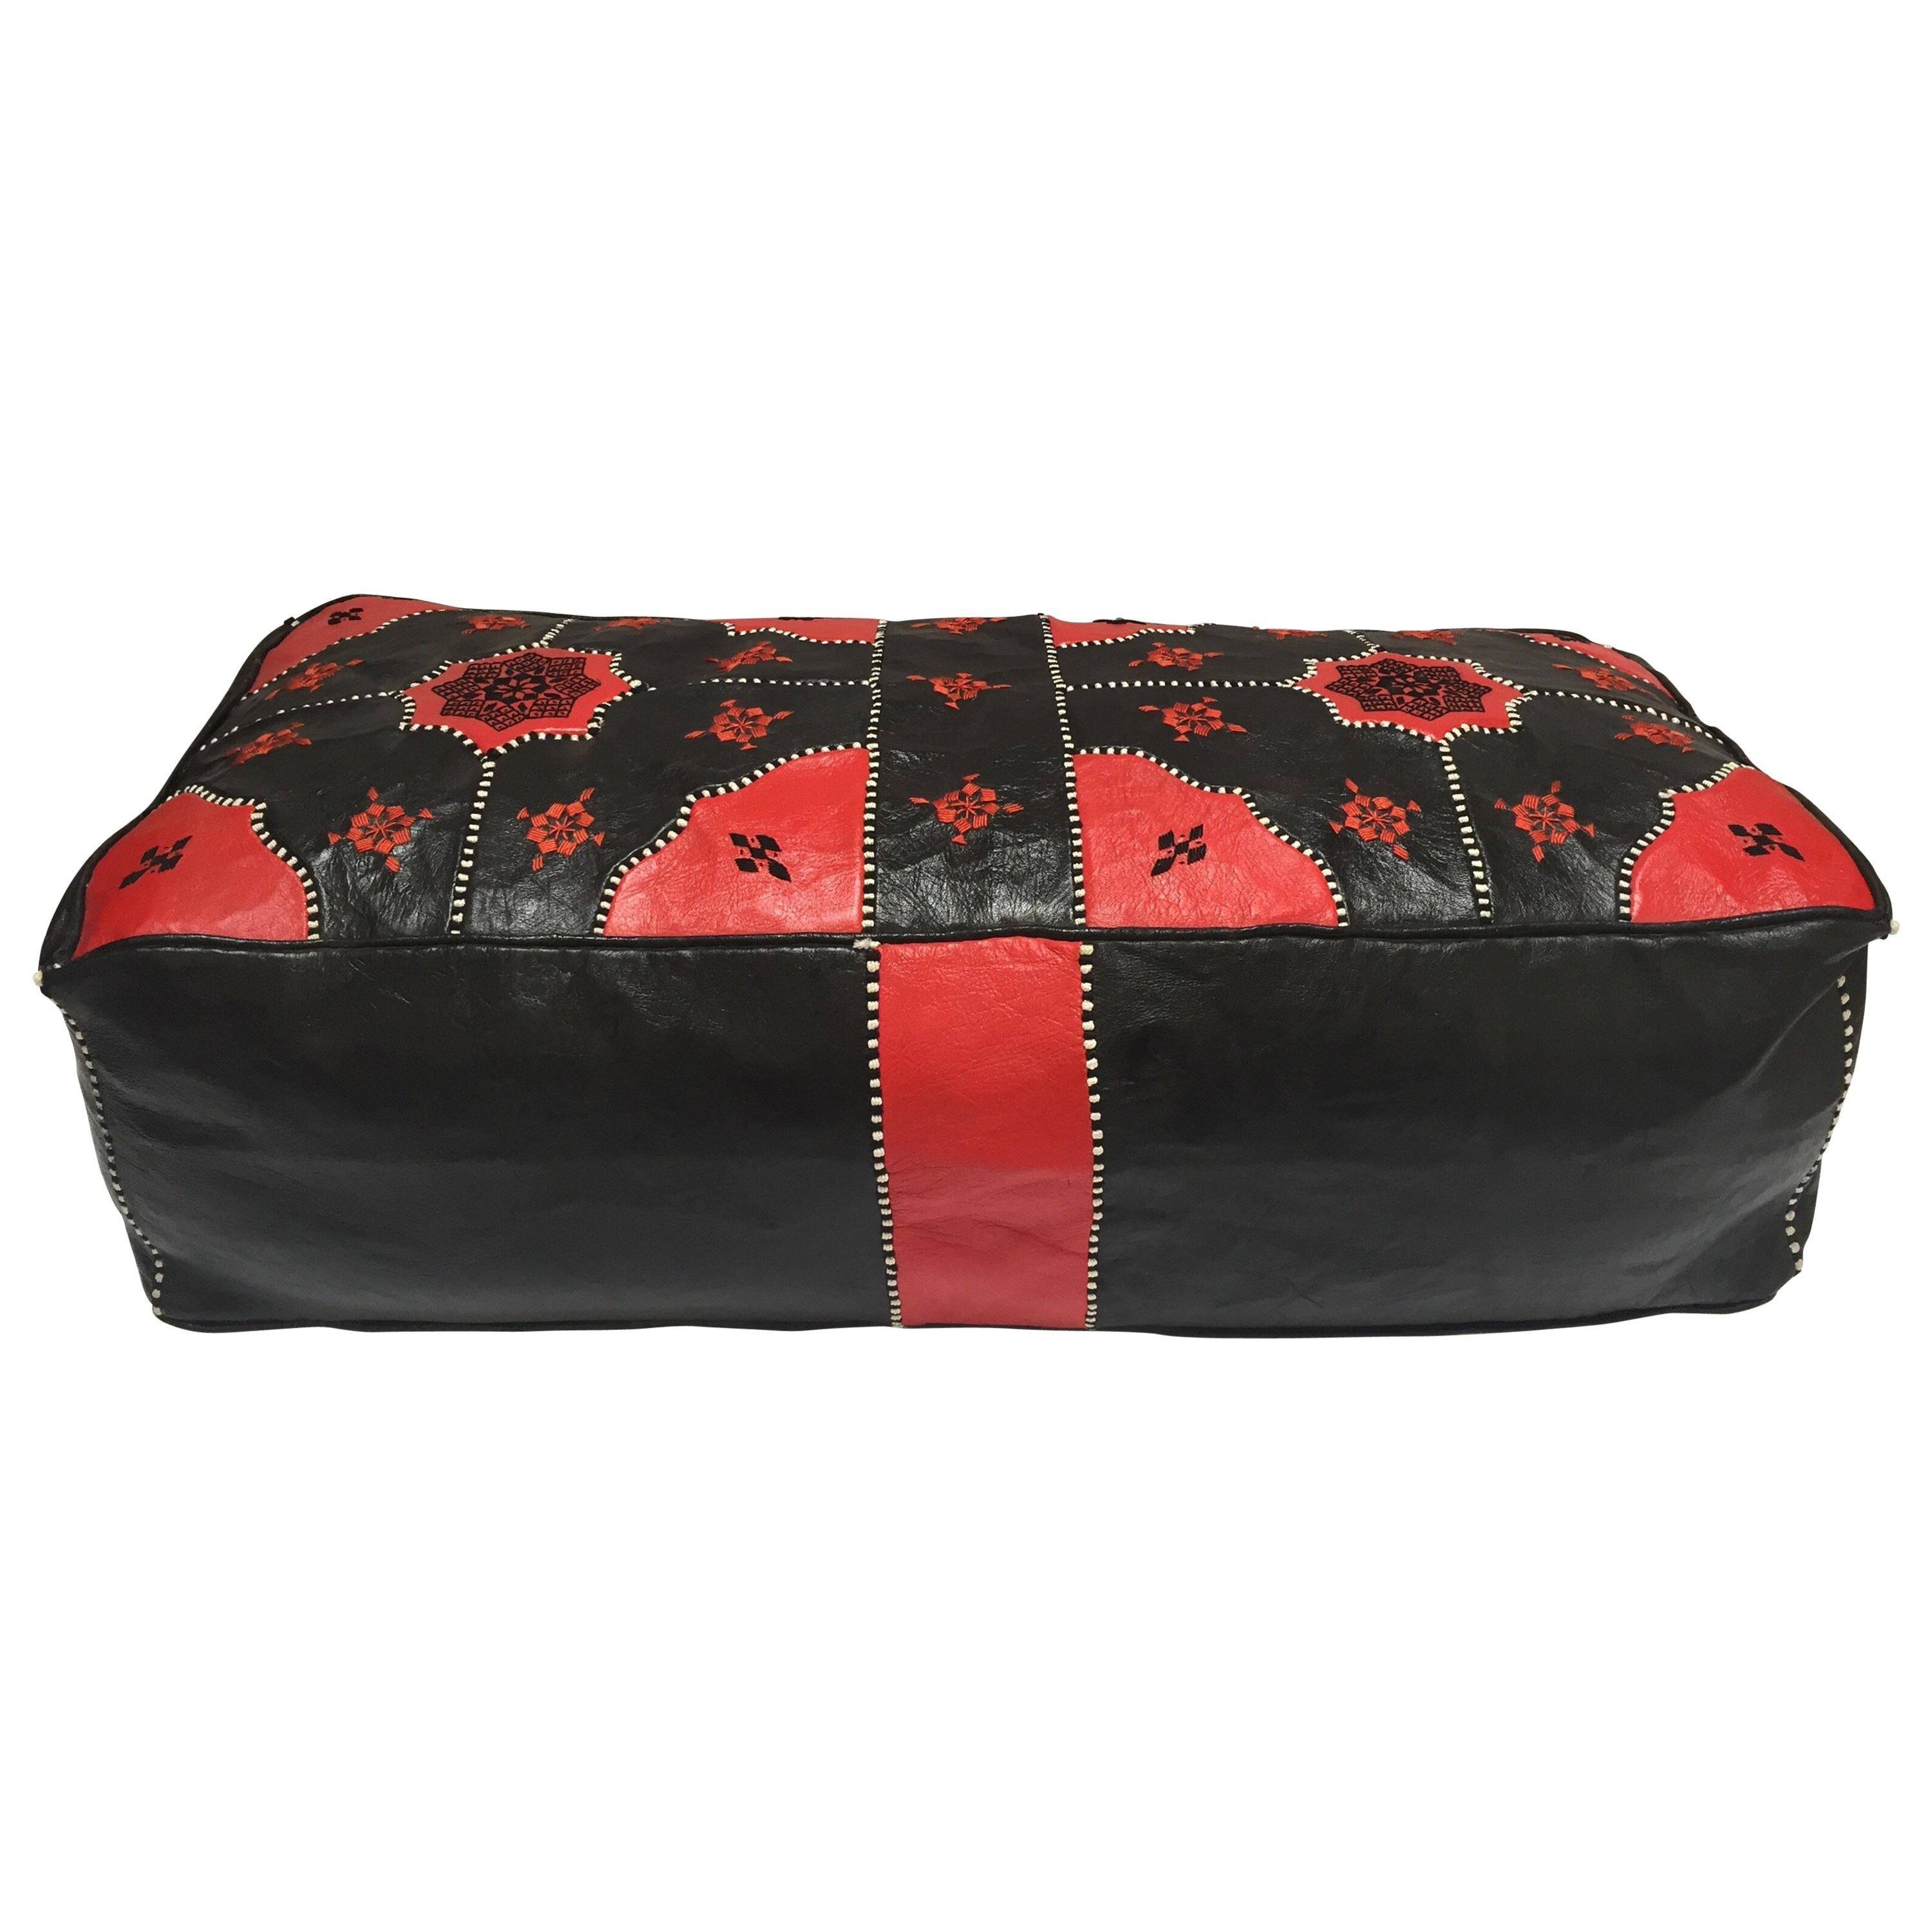 Vintage Moroccan Leather Rectangular Pouf in Red and Black For Sale